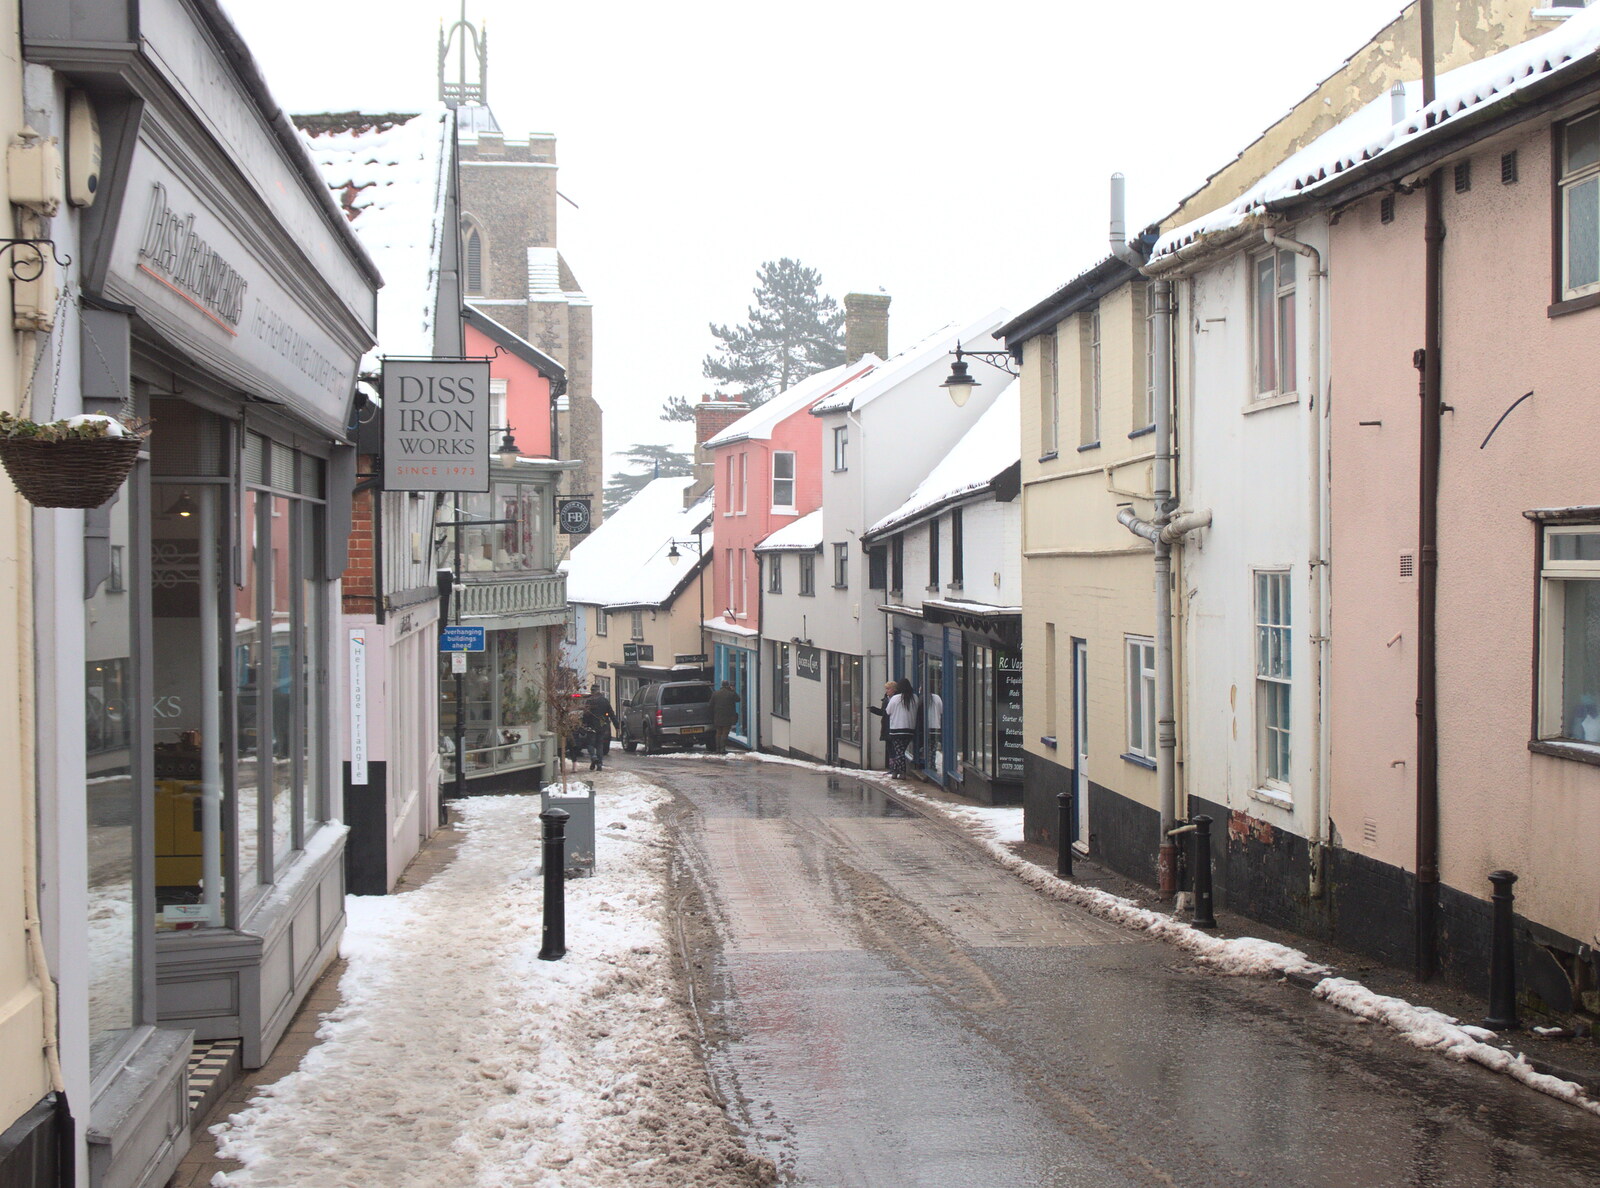 St. Nicholas Street from More March Snow and a Postcard from Diss, Norfolk - 3rd March 2018